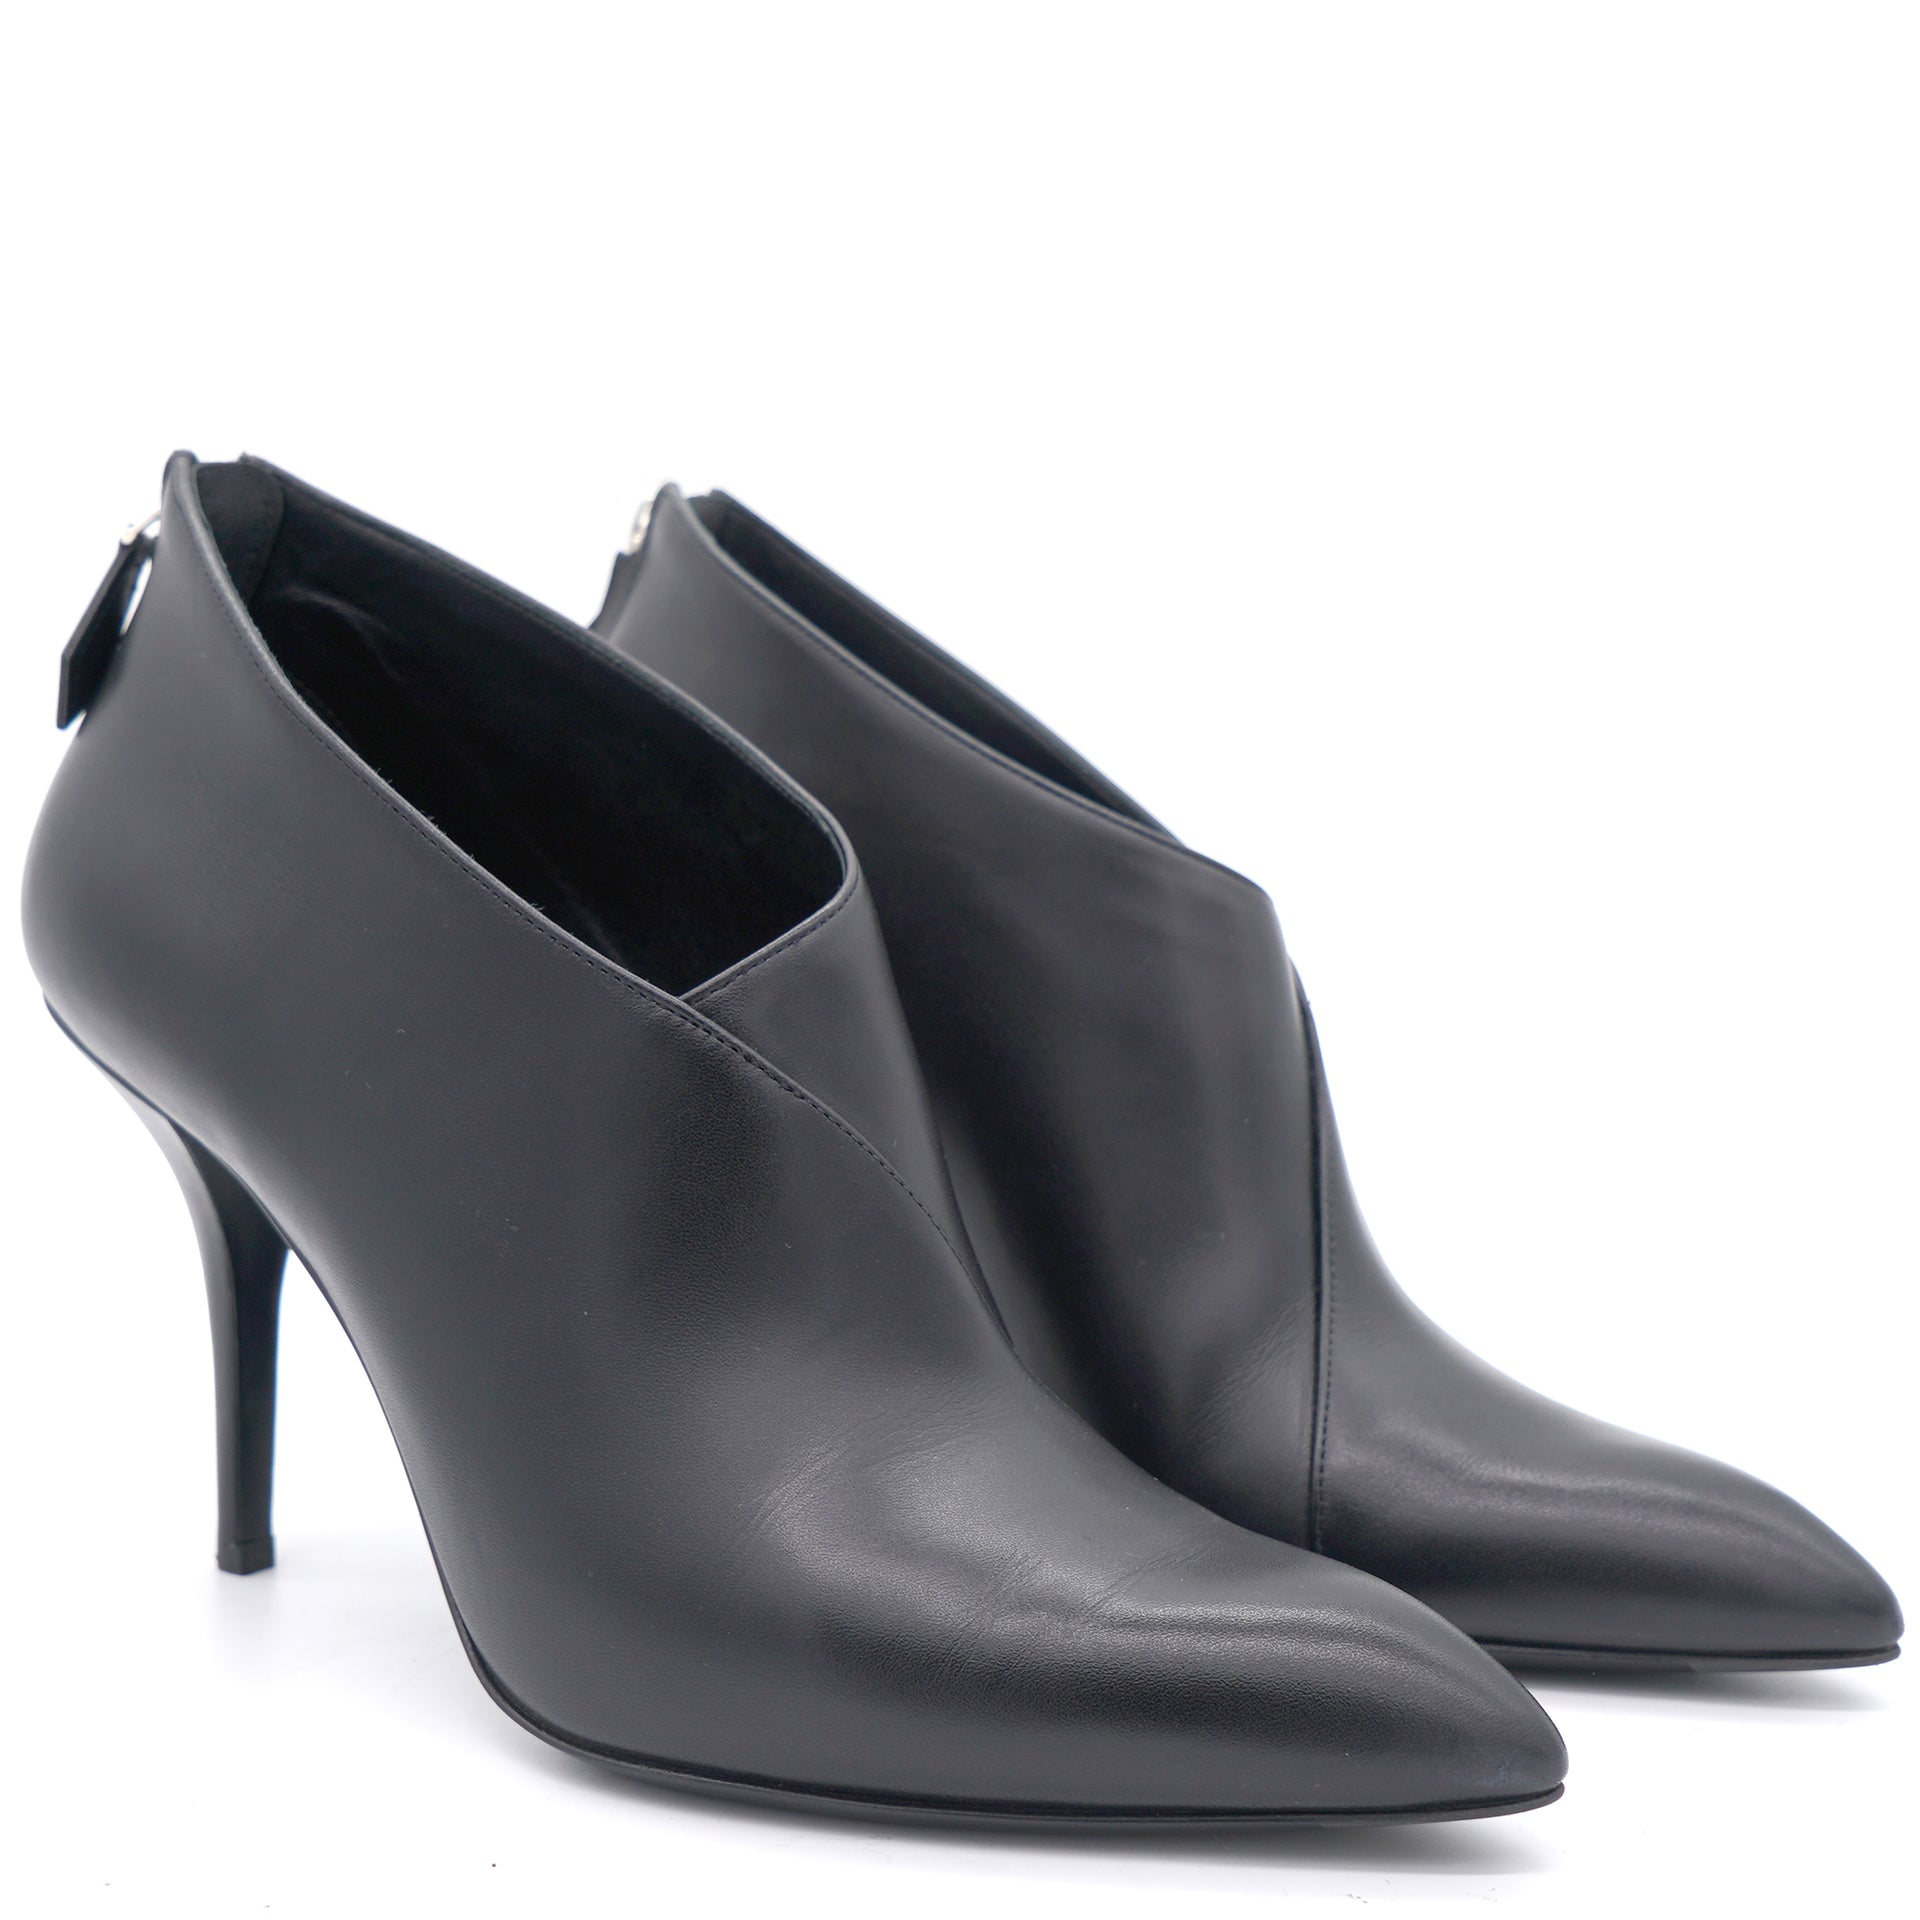 Black Leather Pointed-Toe Ankle Booties 39